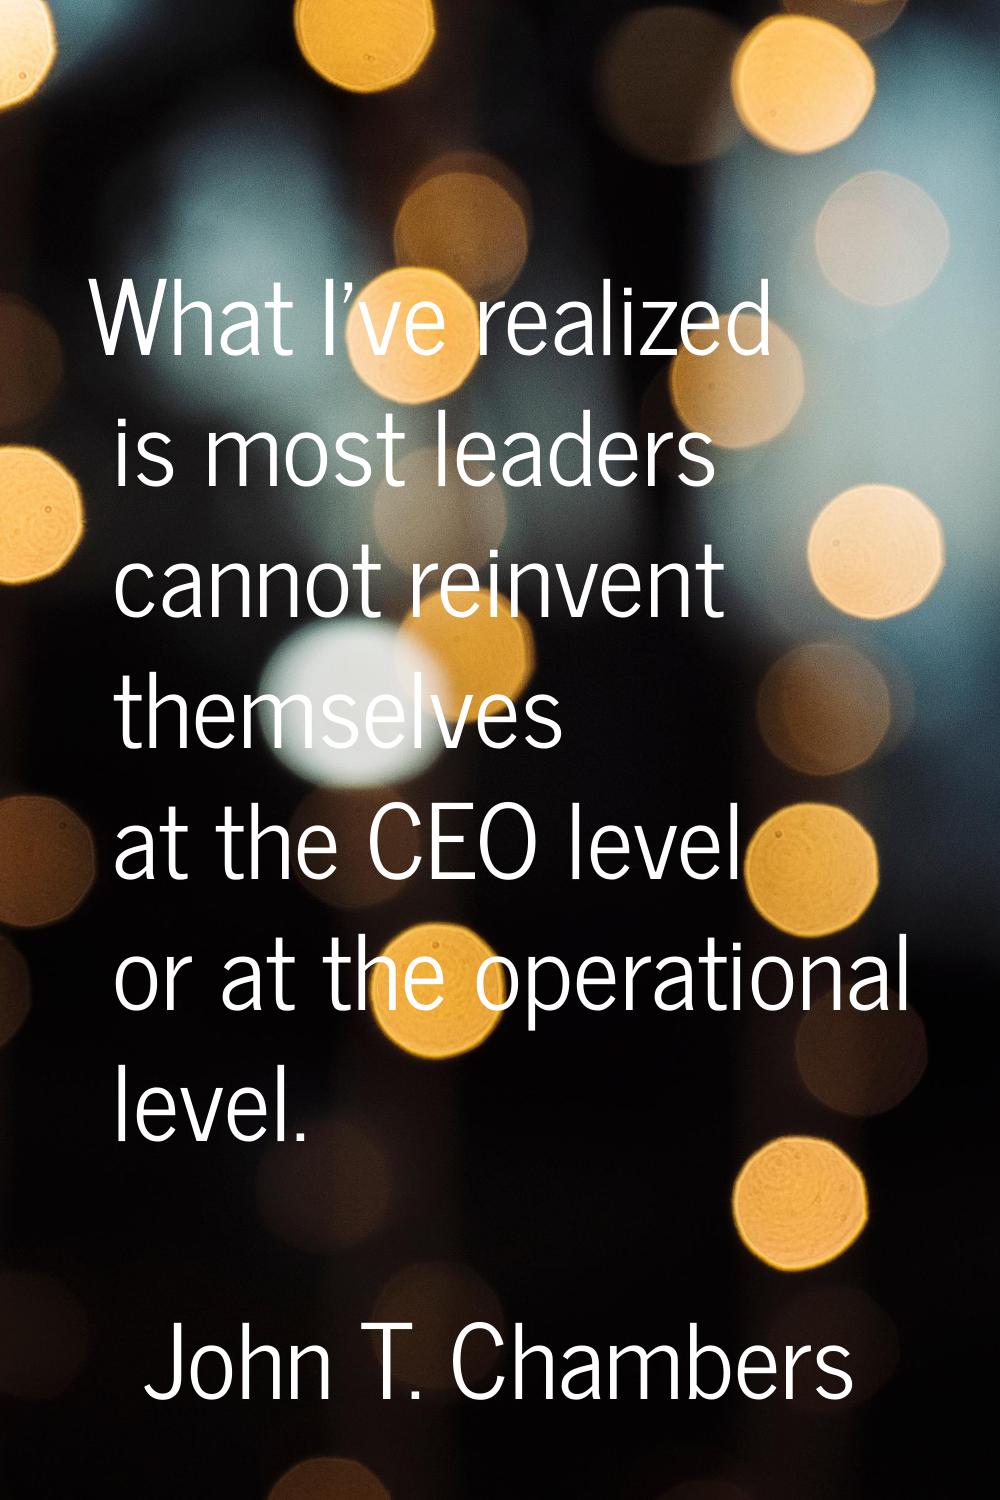 What I've realized is most leaders cannot reinvent themselves at the CEO level or at the operationa